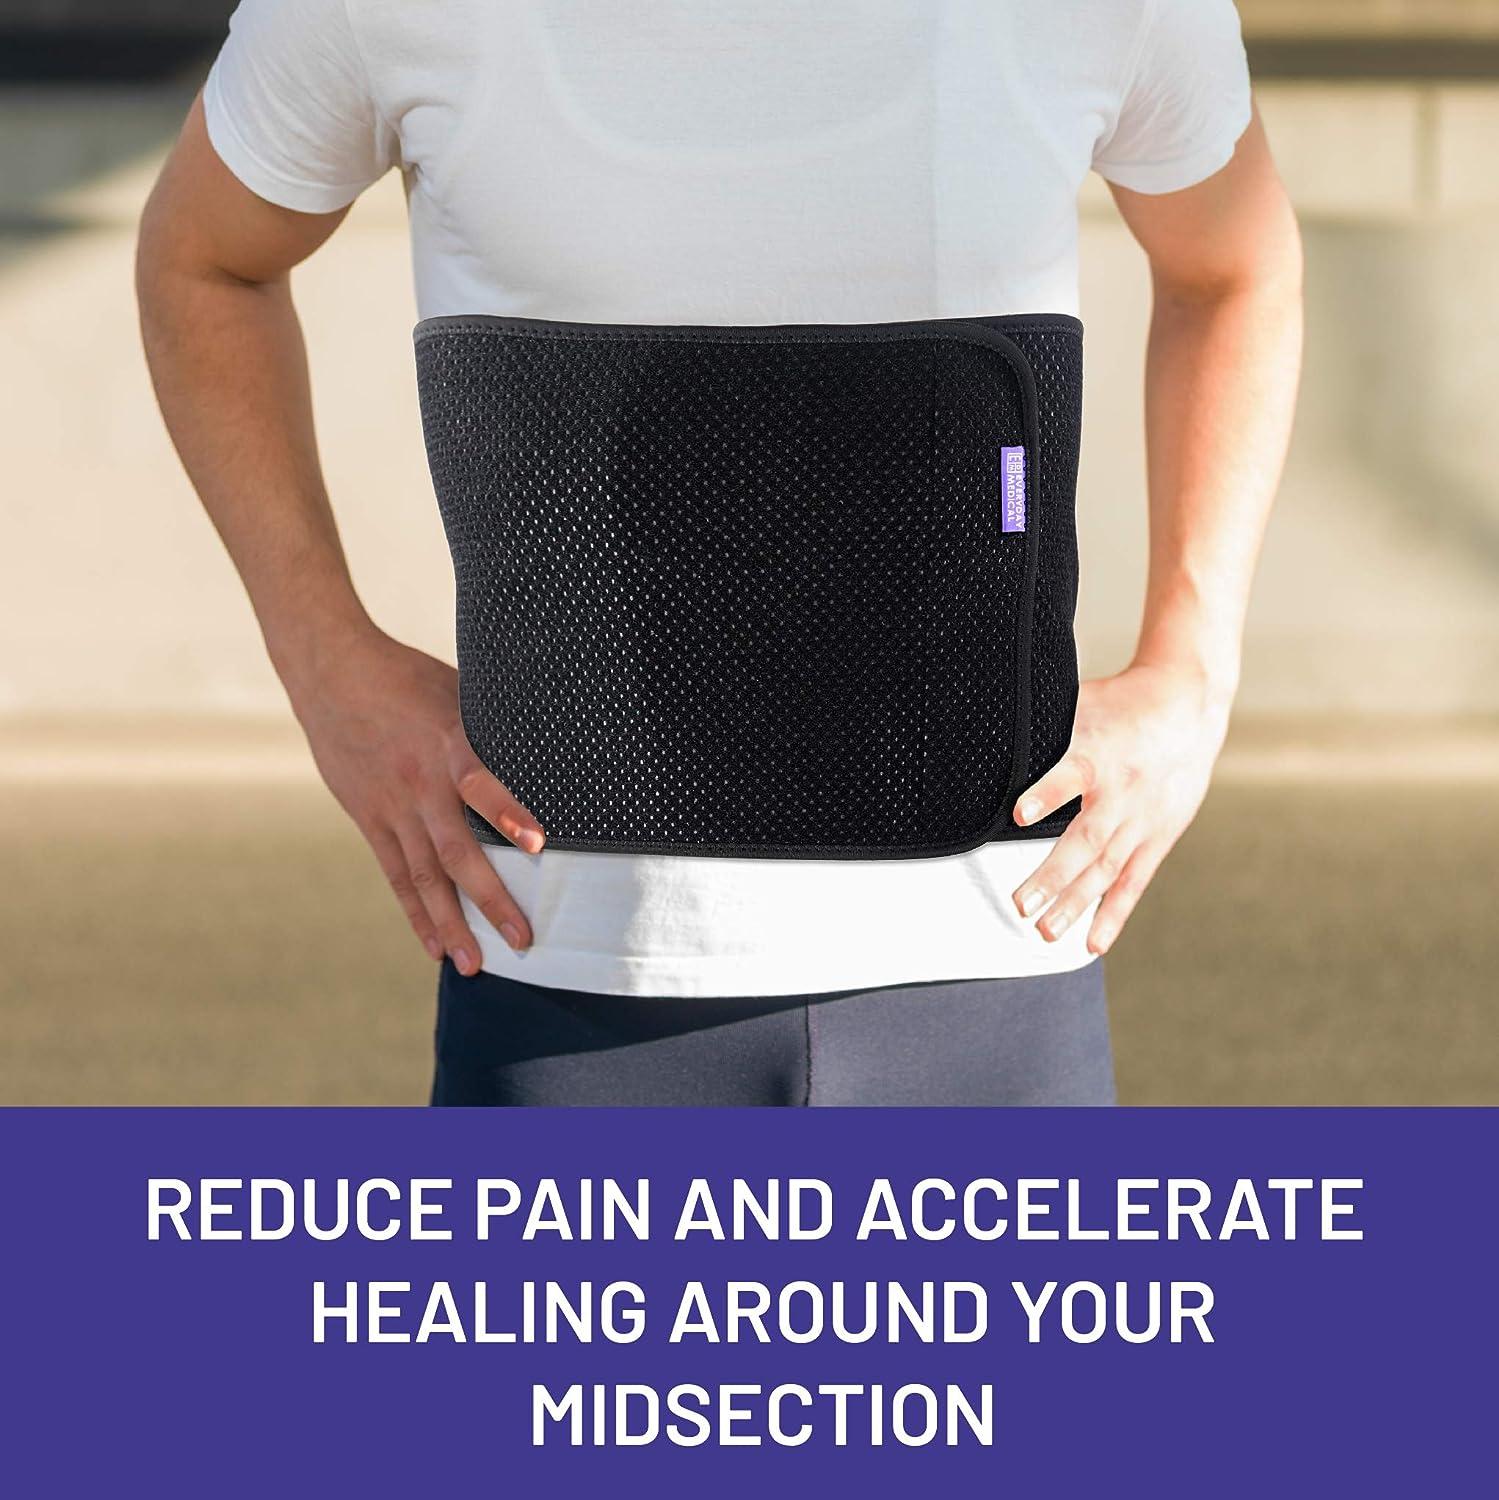 Everyday Medical Abdominal Binder Post Surgery with Bamboo Charcoal  Accelerate Healing and Reduce Swelling After C-Section Abdomen Surgeries  Tummy Tuck Bladder & Gastric Bypass Belly Girdle